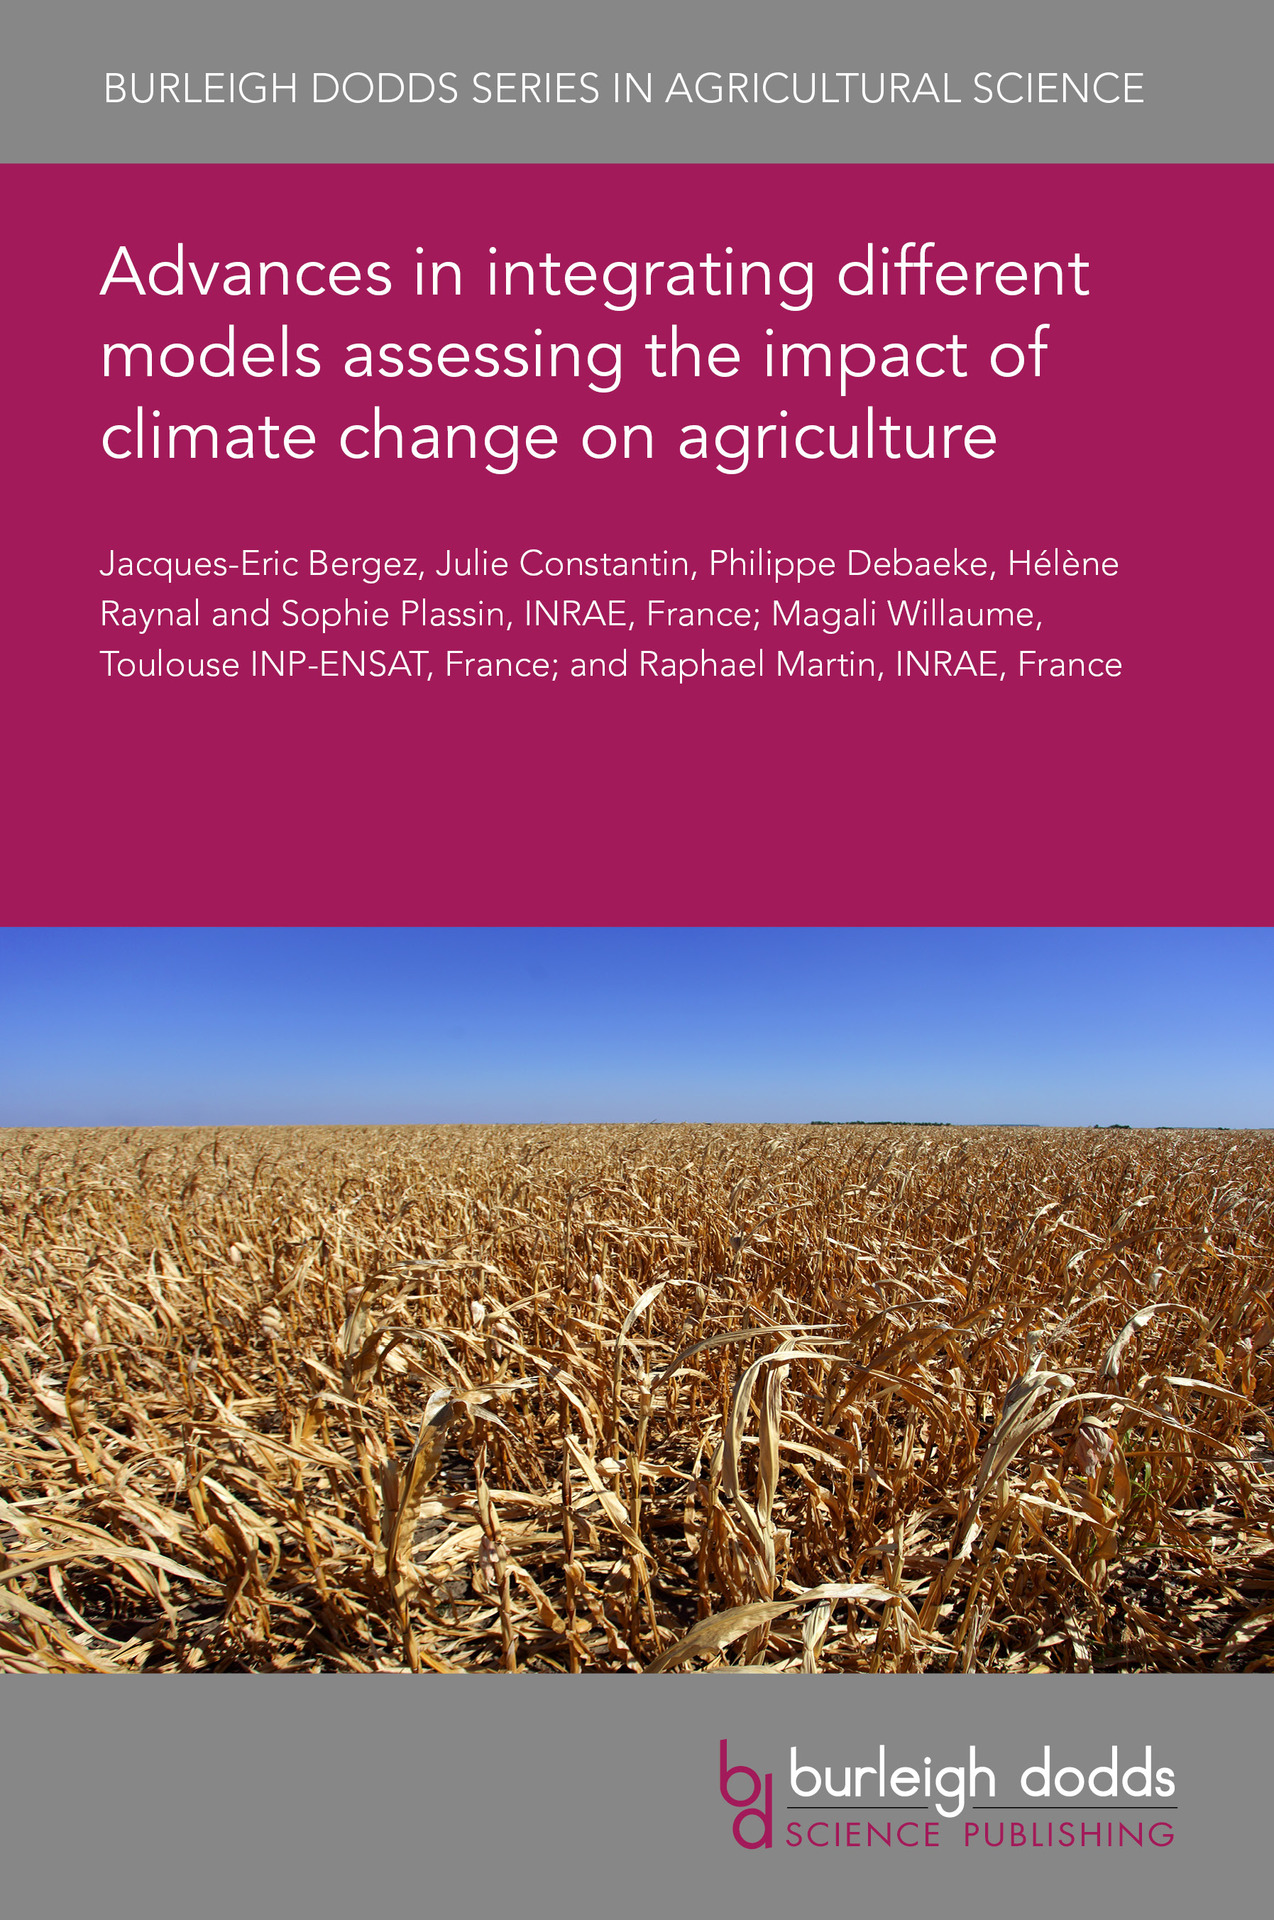 Advances in integrating different models assessing the impact of climate change on agriculture